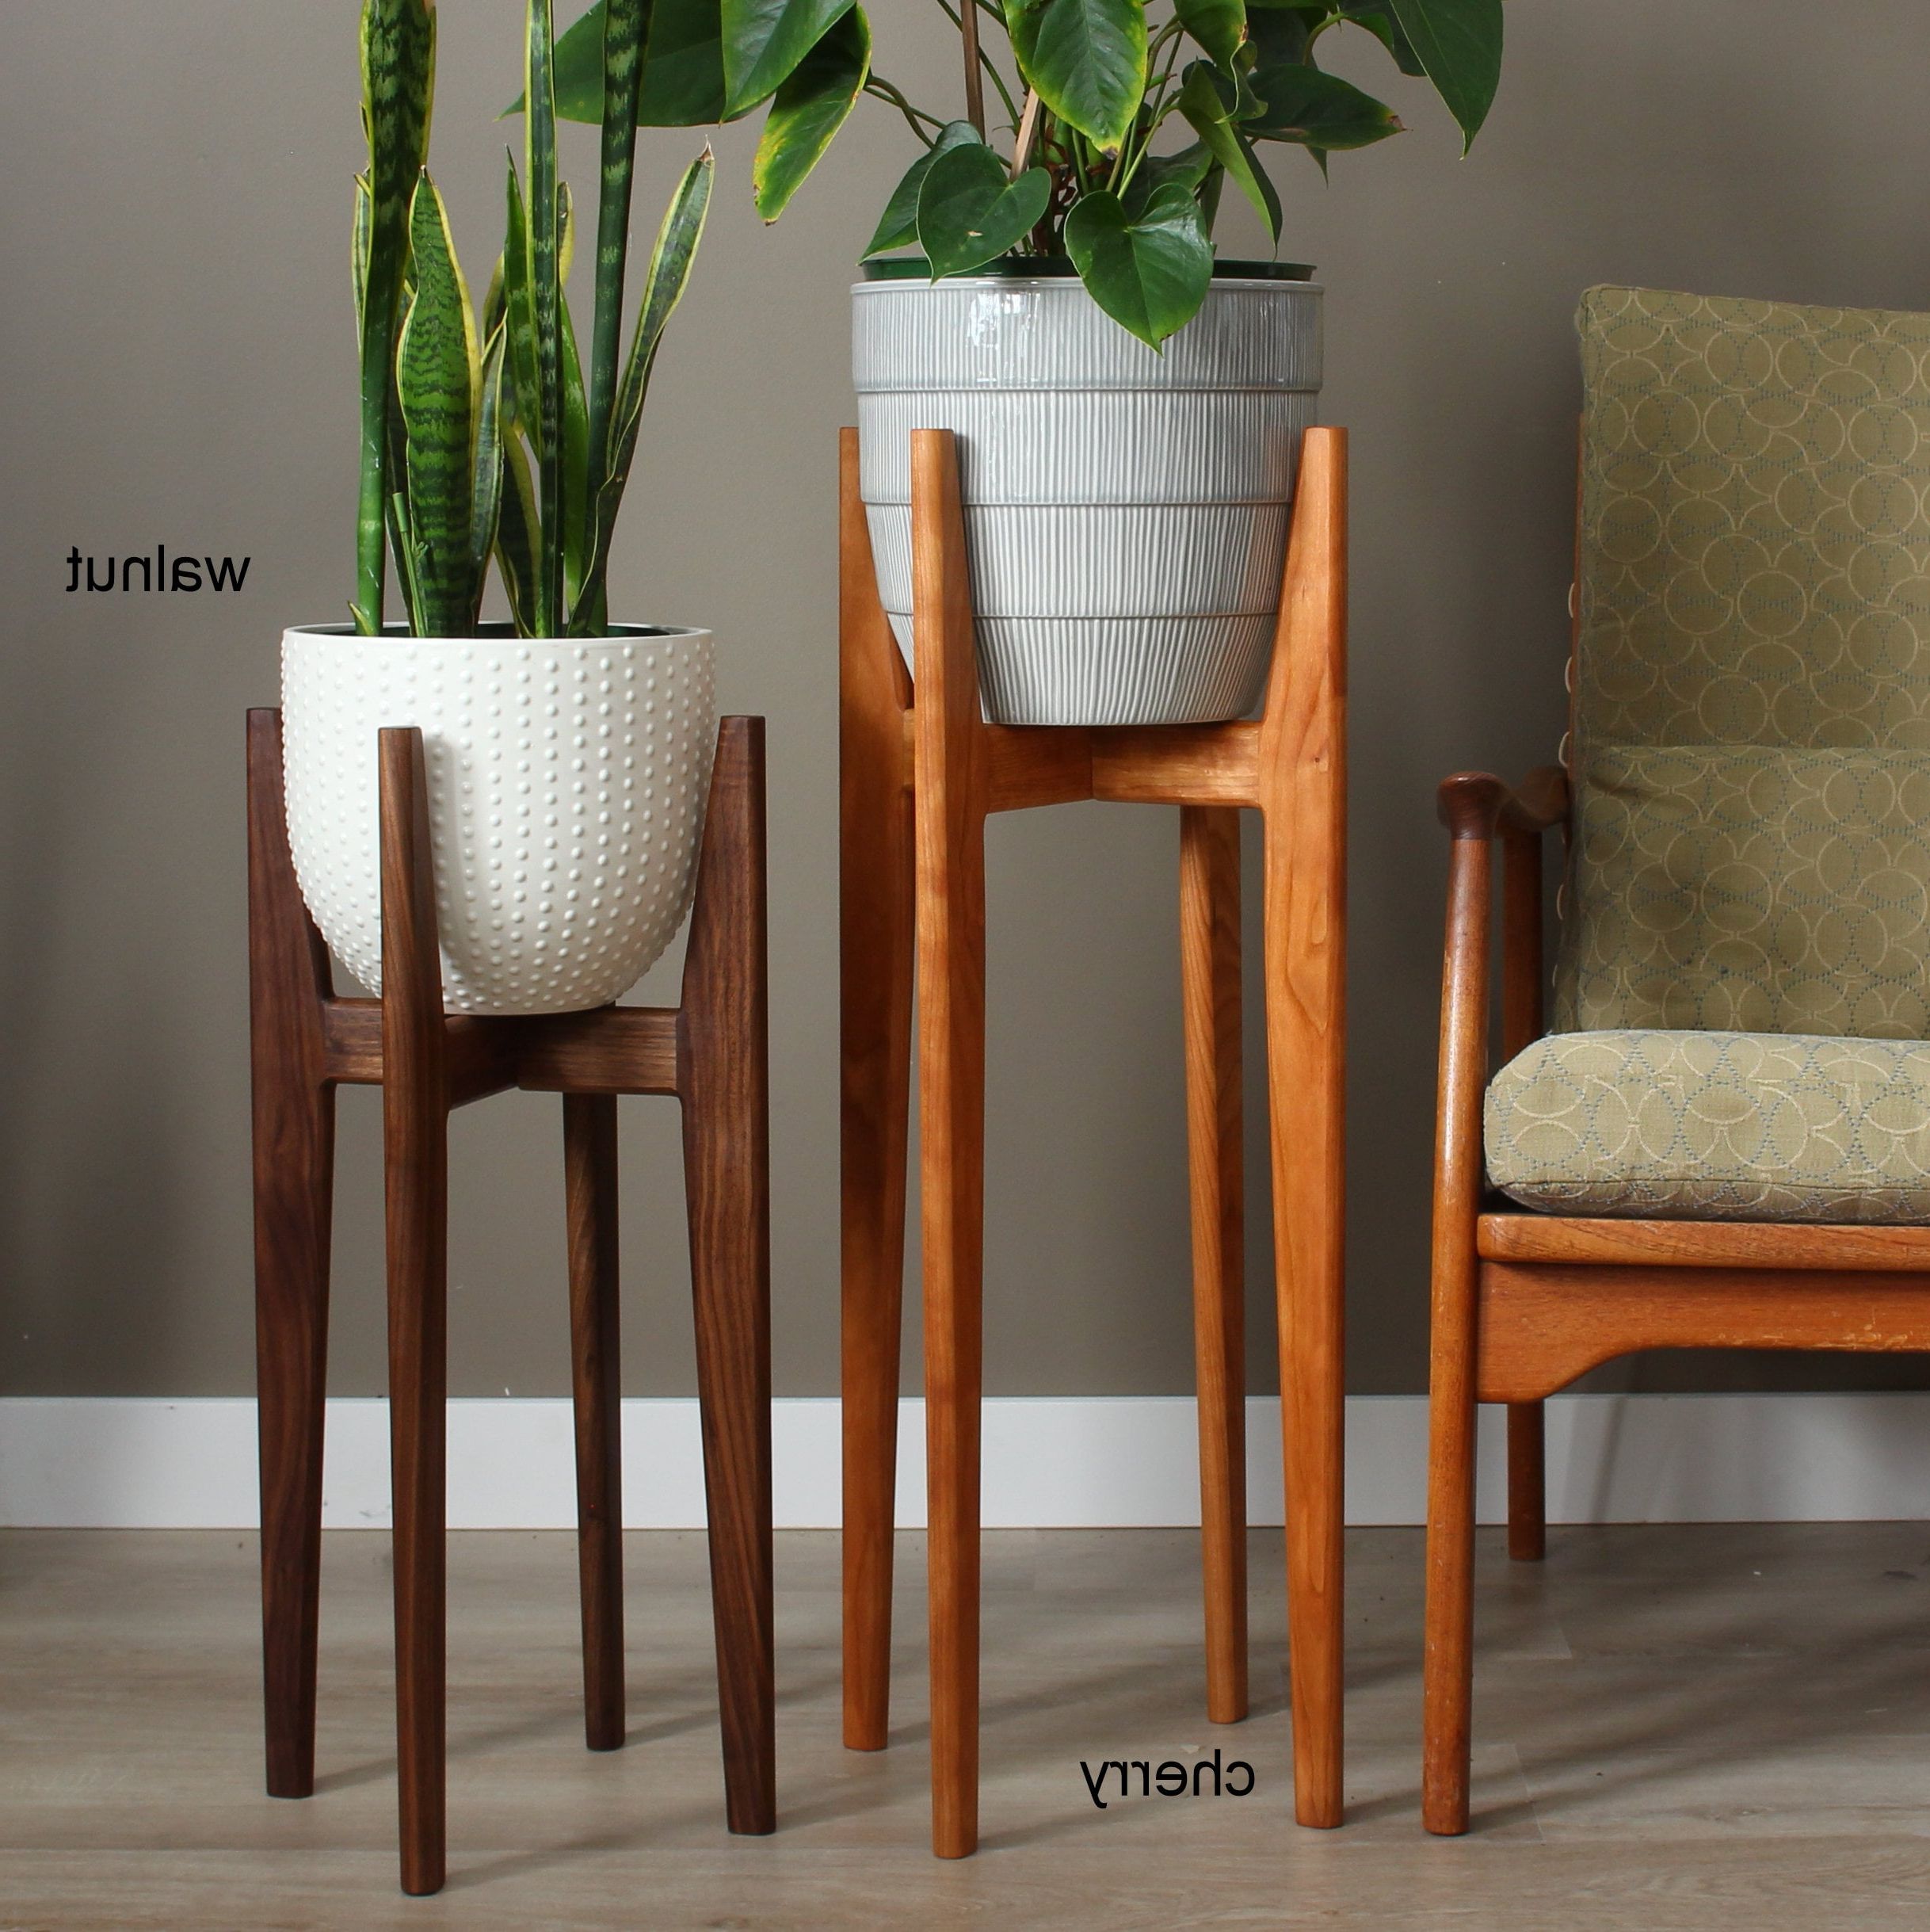 Trendy Mid Century Modern Plant Stand Our Original Design Indoor – Etsy With Wood Plant Stands (View 2 of 15)